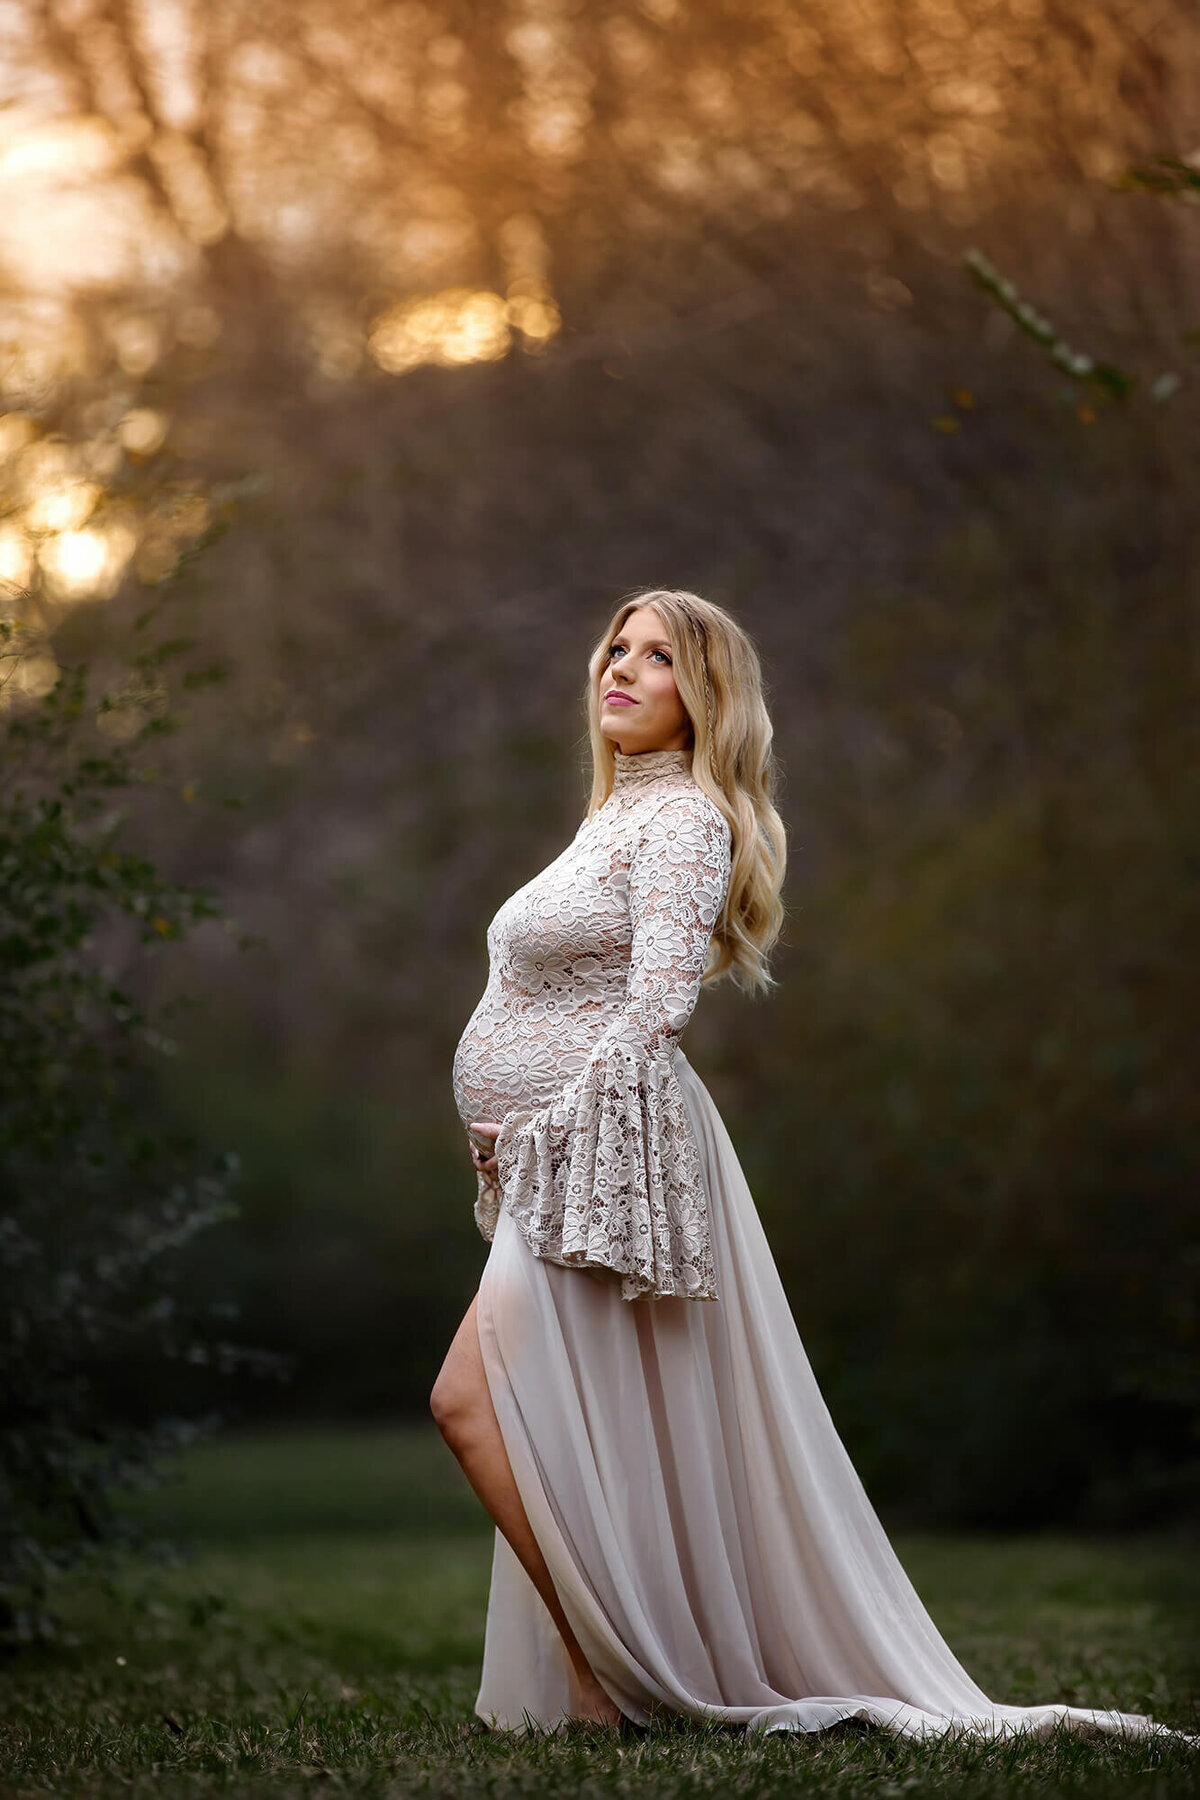 Beautiful maternity outfit and model during golden hour.